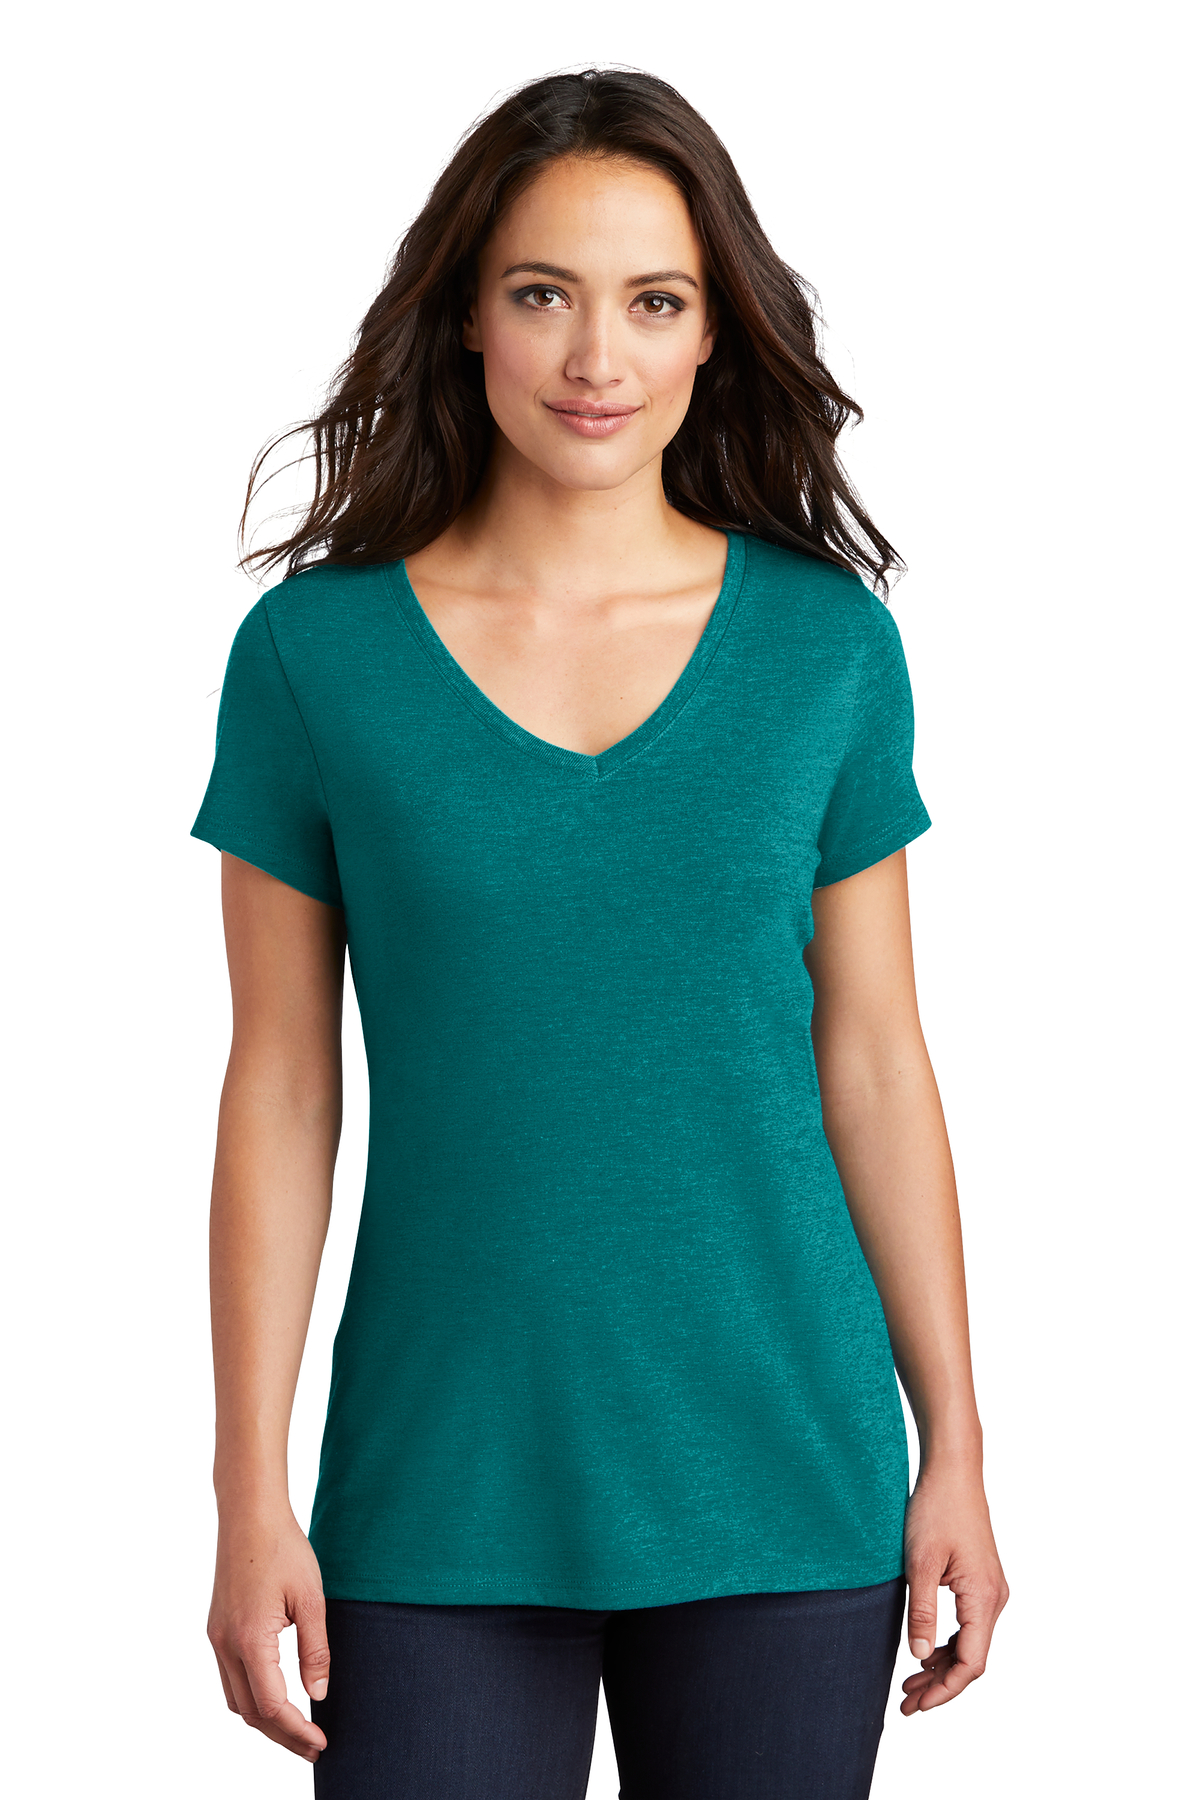 District Embroidered Women's Perfect Tri V-Neck Tee | Women's Apparel ...